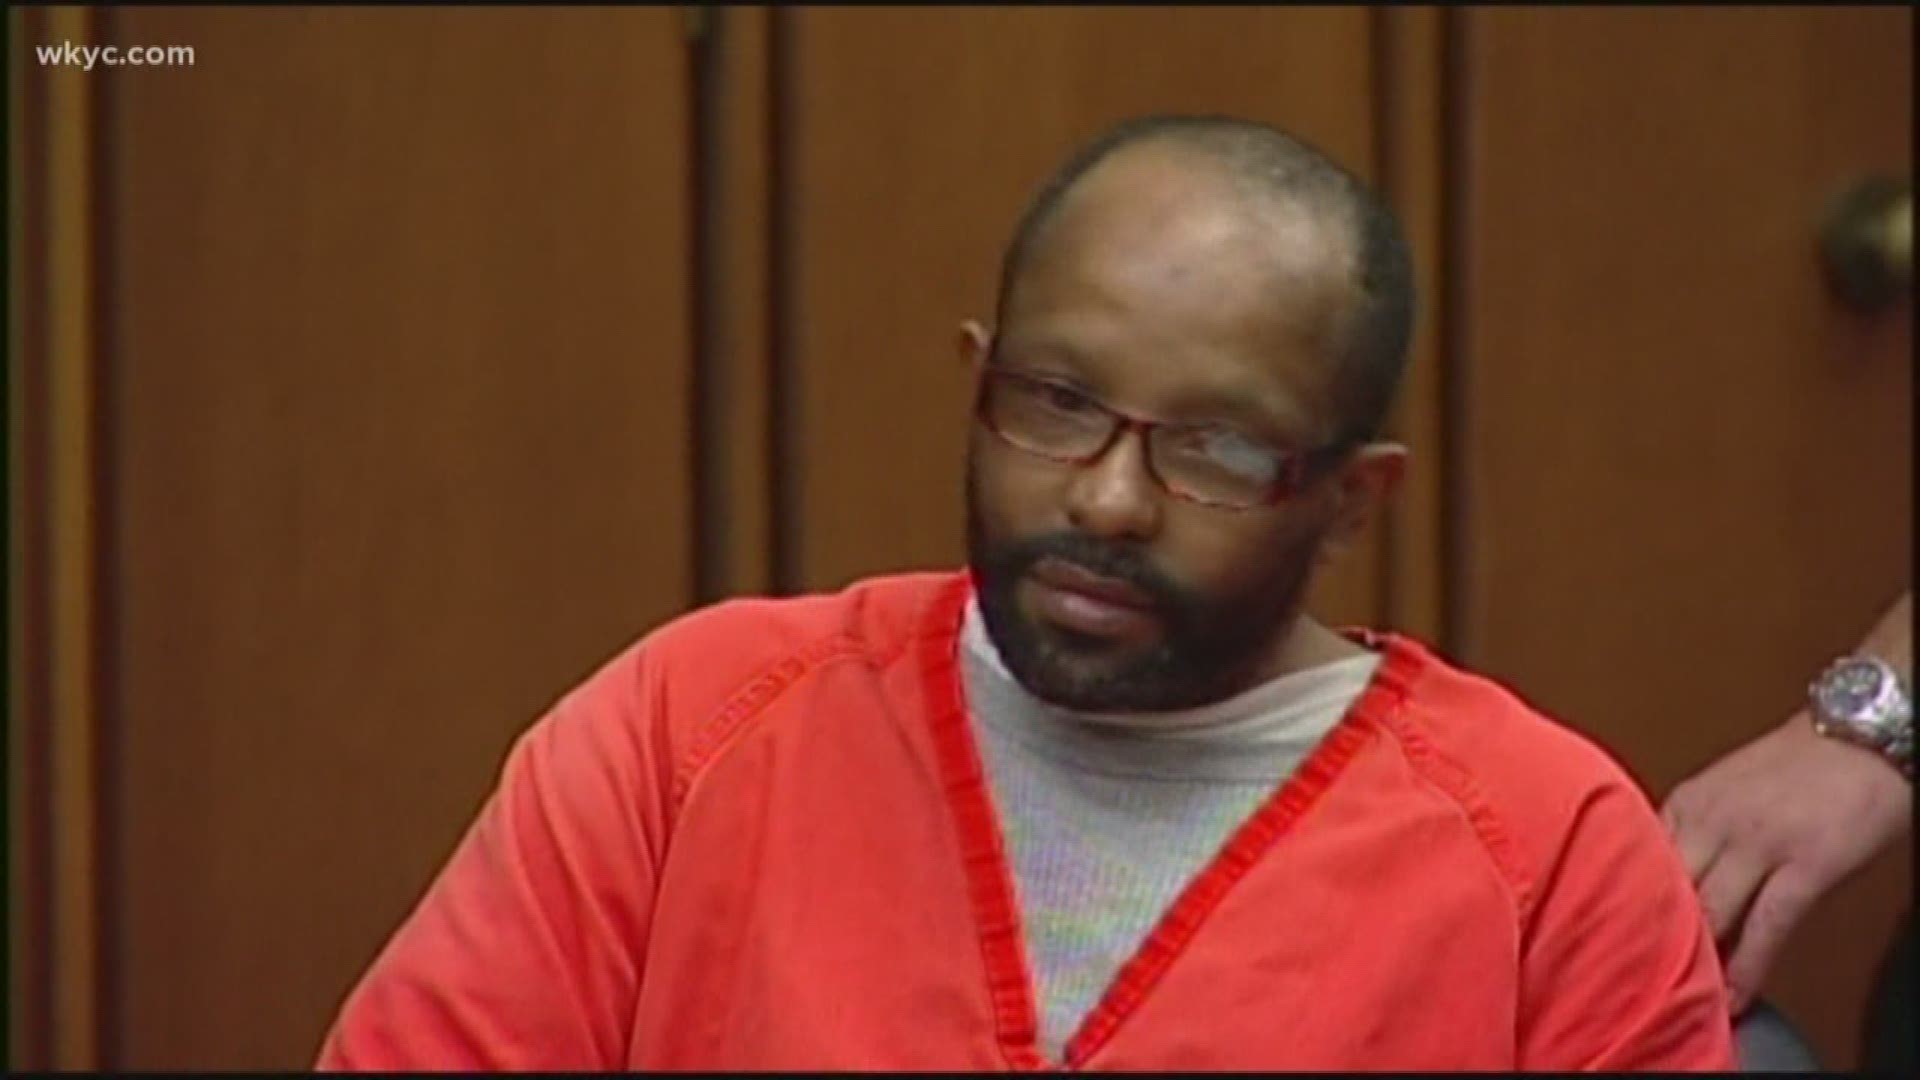 Cleveland paying $1 million in settlement to 6 families of Anthony Sowell victims